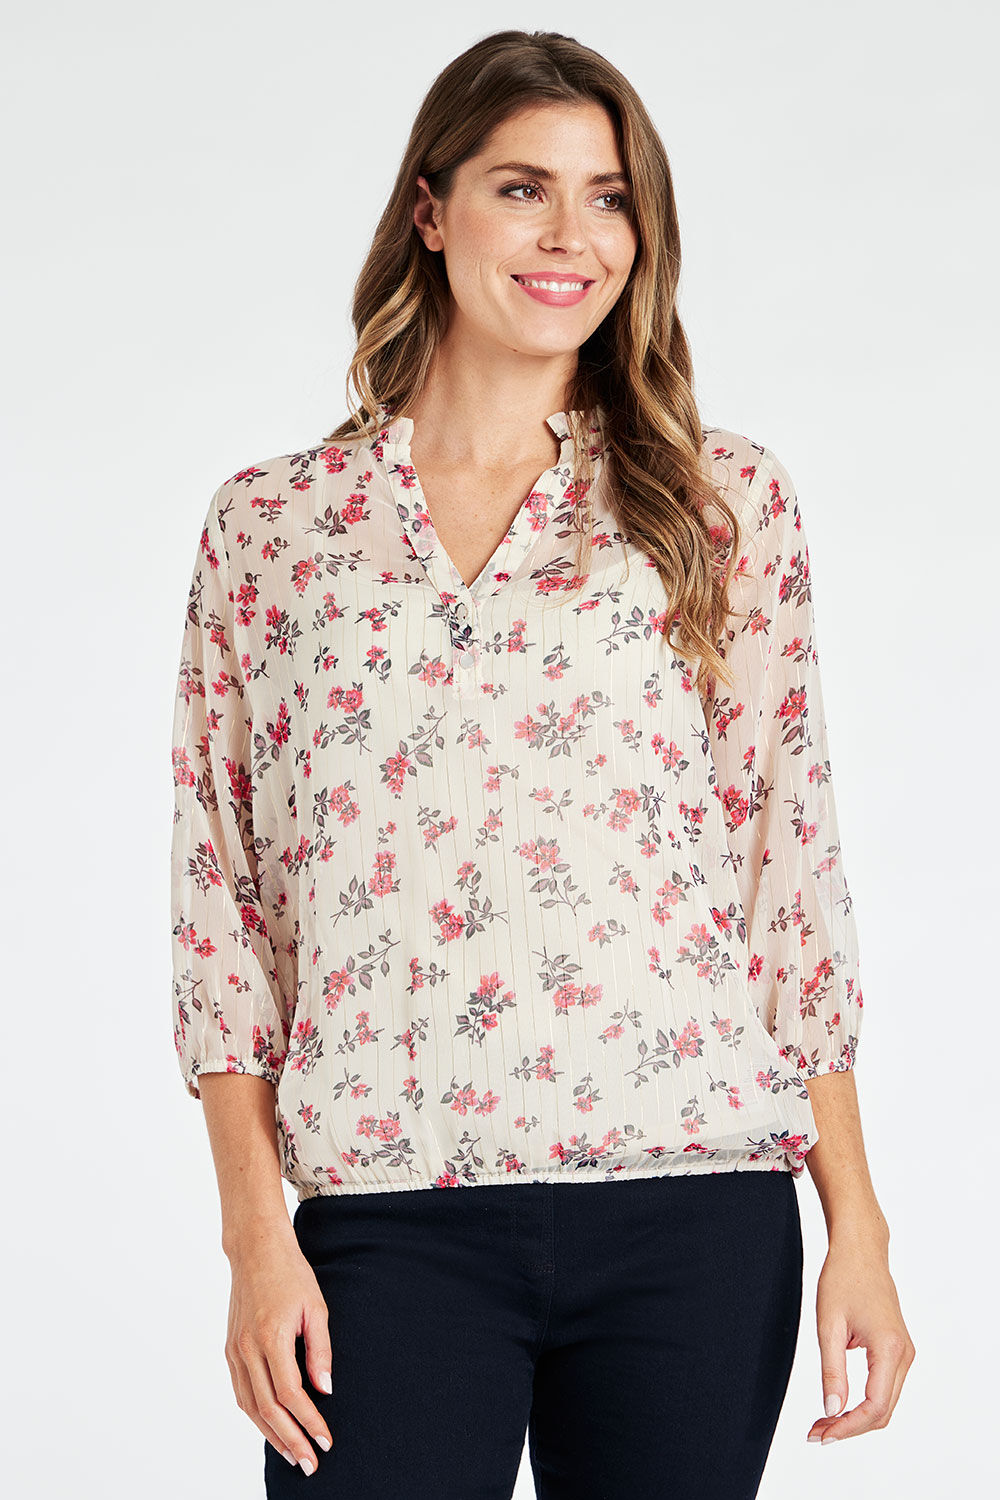 Bonmarche Ivory 3/4 Sleeve Floral Bubble Hem Blouse With Cami Top, Size: 14